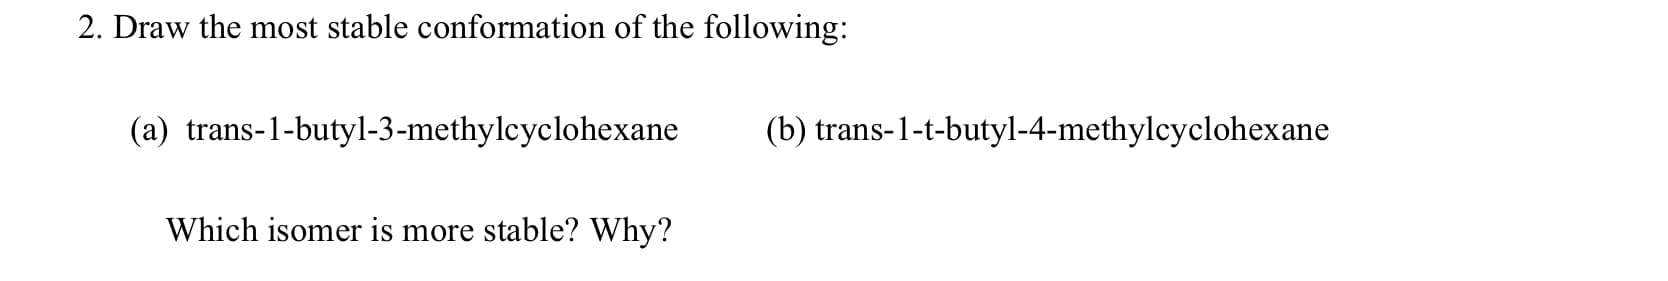 2. Draw the most stable conformation of the following:
(a) trans-1-butyl-3-methylcyclohexane
(b) trans-1-t-butyl-4-methylcyclohexane
Which isomer is more stable? Why?
